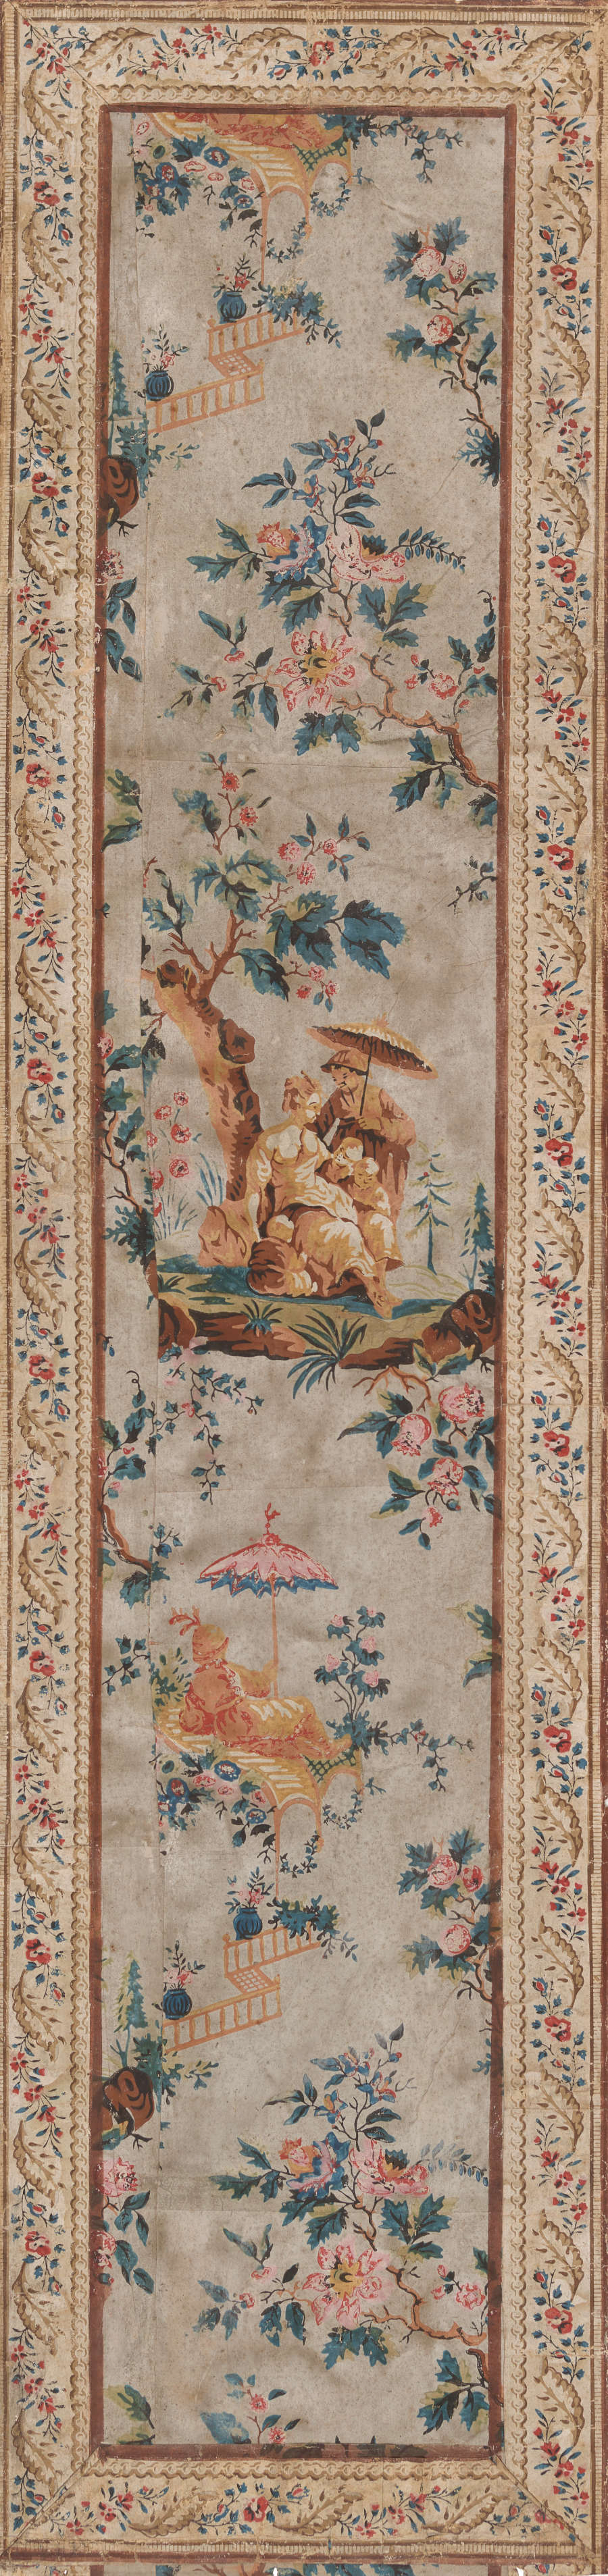 Tall, narrow panel of aged, elegant wallpaper featuring a central pastoral scene with surrounding floral patterns and ornate borders. The pattern is depicted in pastel colors against a beige background.